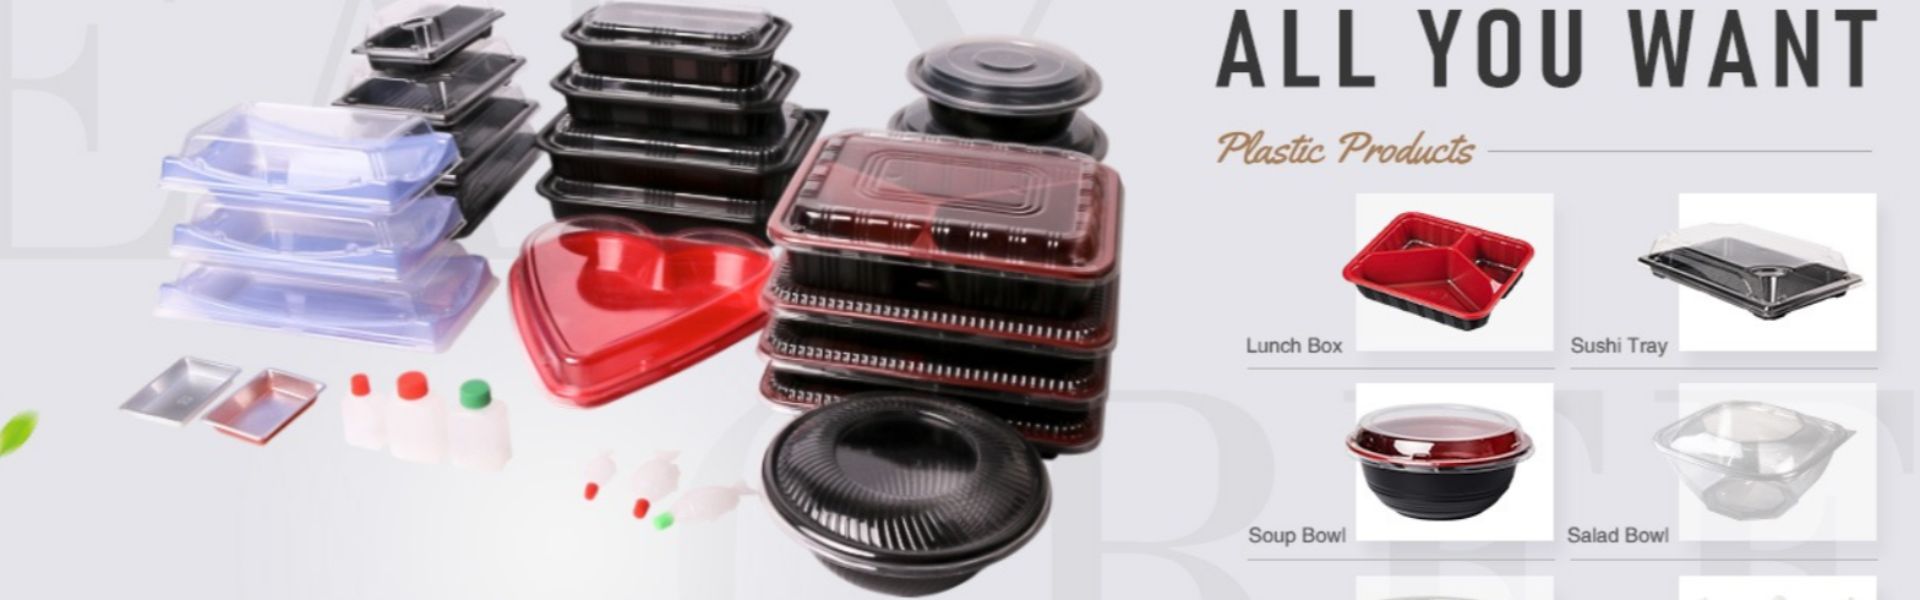 Sushi-Box, Clamshell-Blister, Lunchbox,Dongguan Meisheng Plastic Packaging Products Co.,Ltd